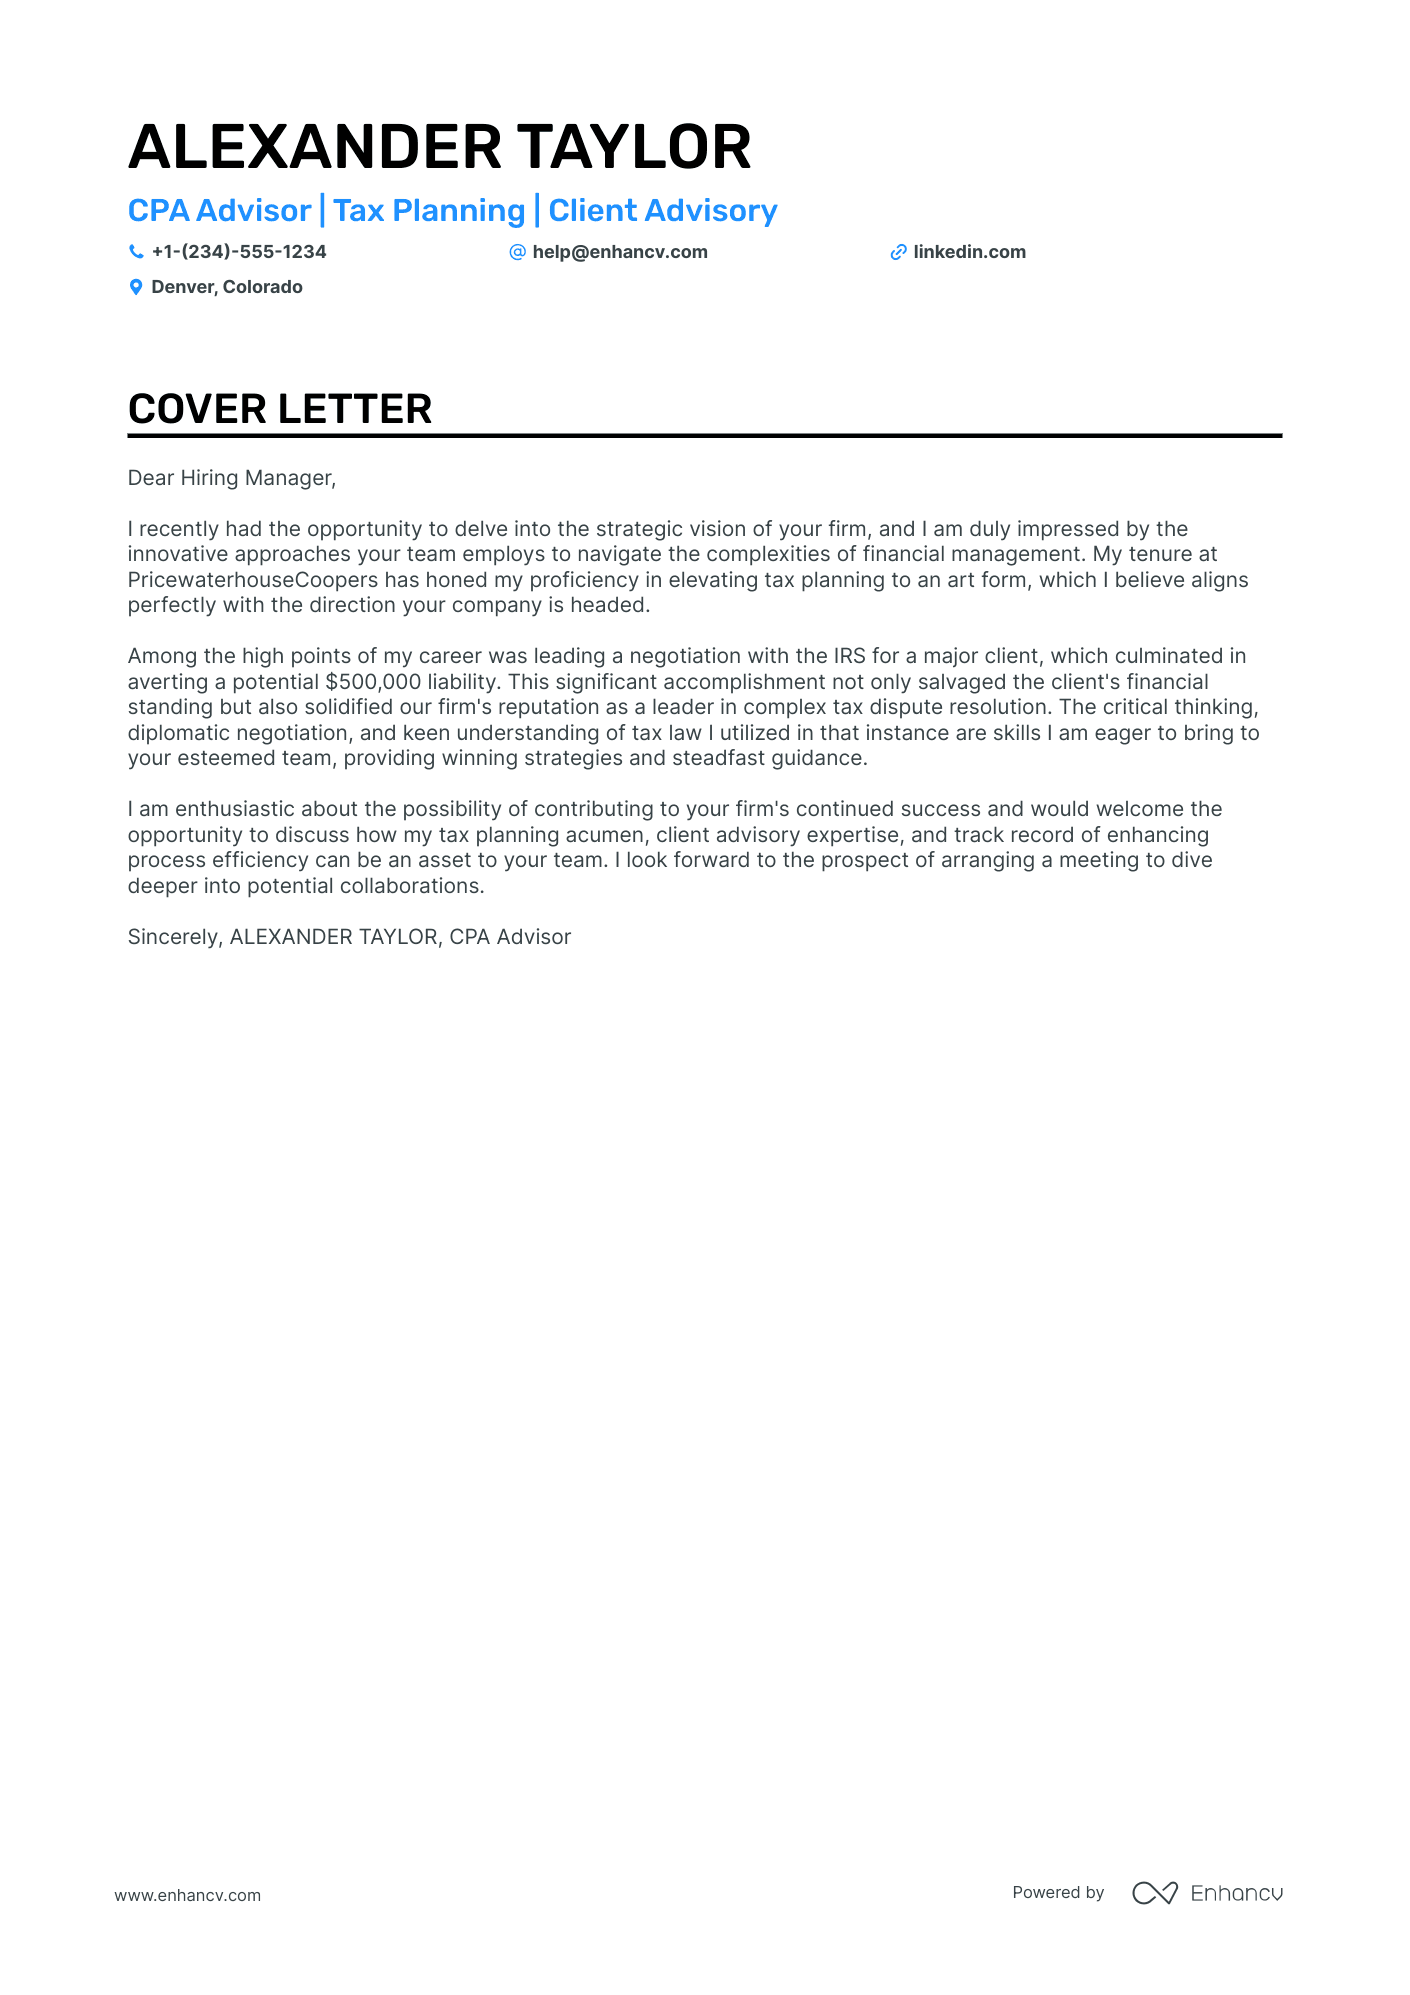 CPA cover letter